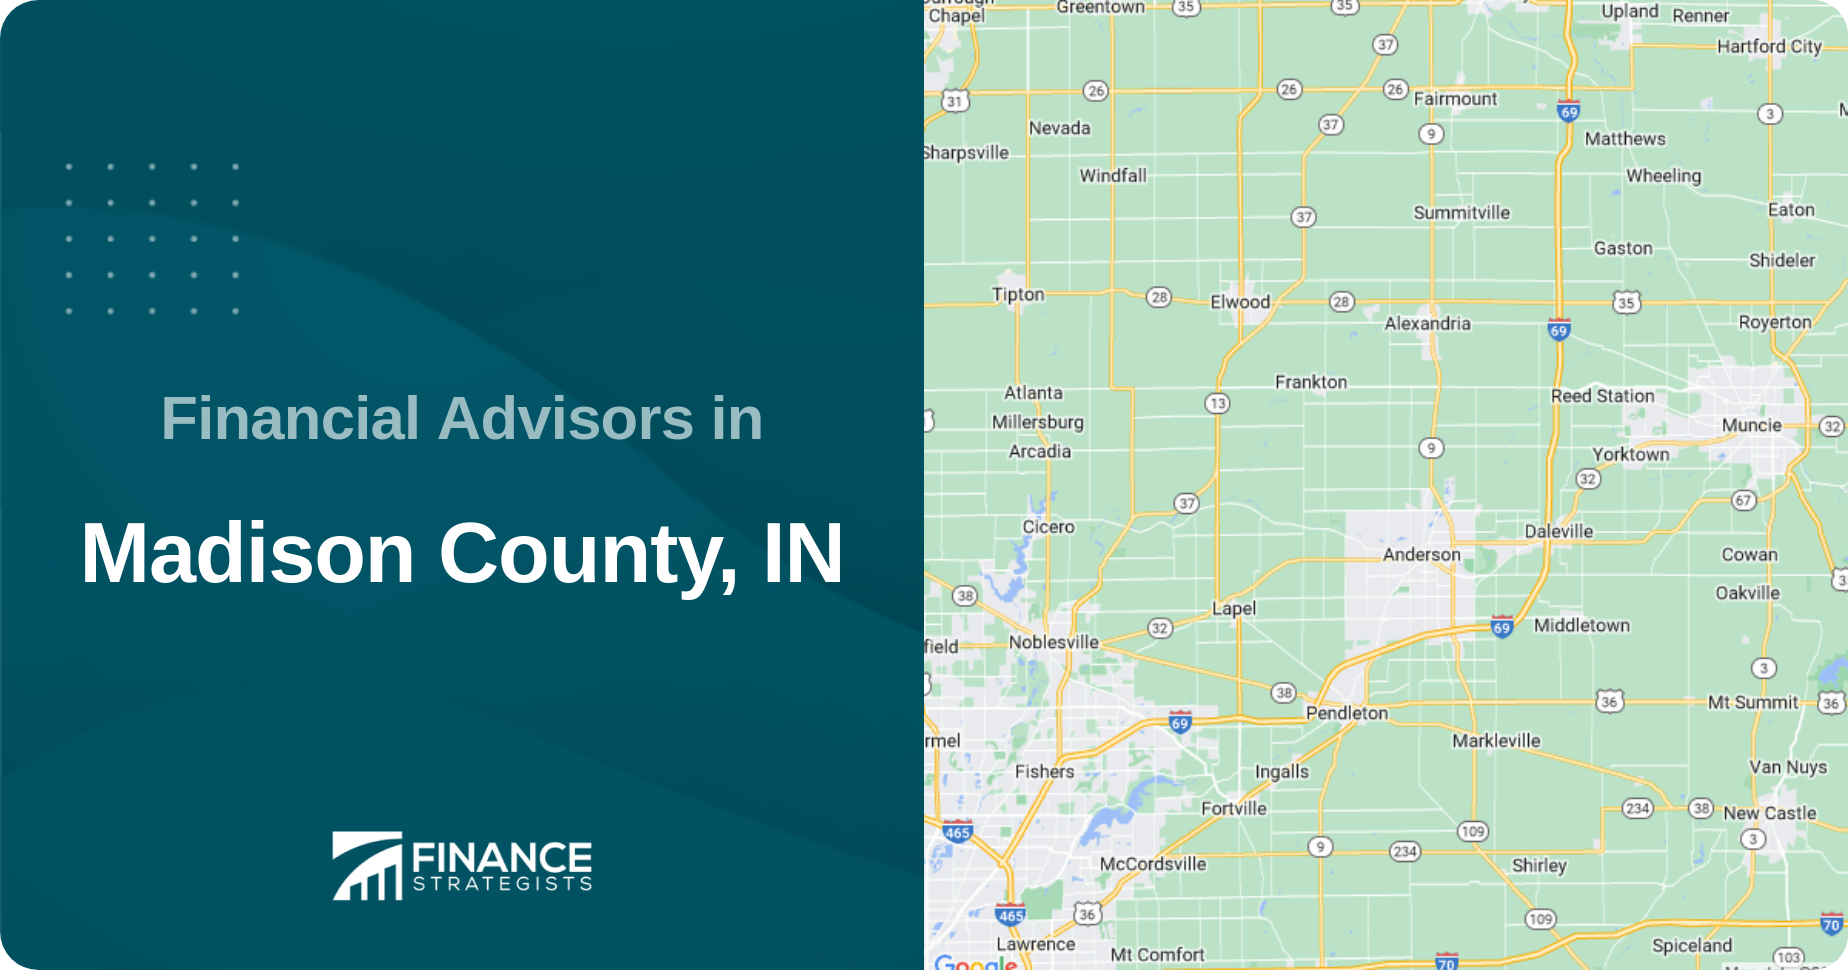 Financial Advisors in Madison County, IN